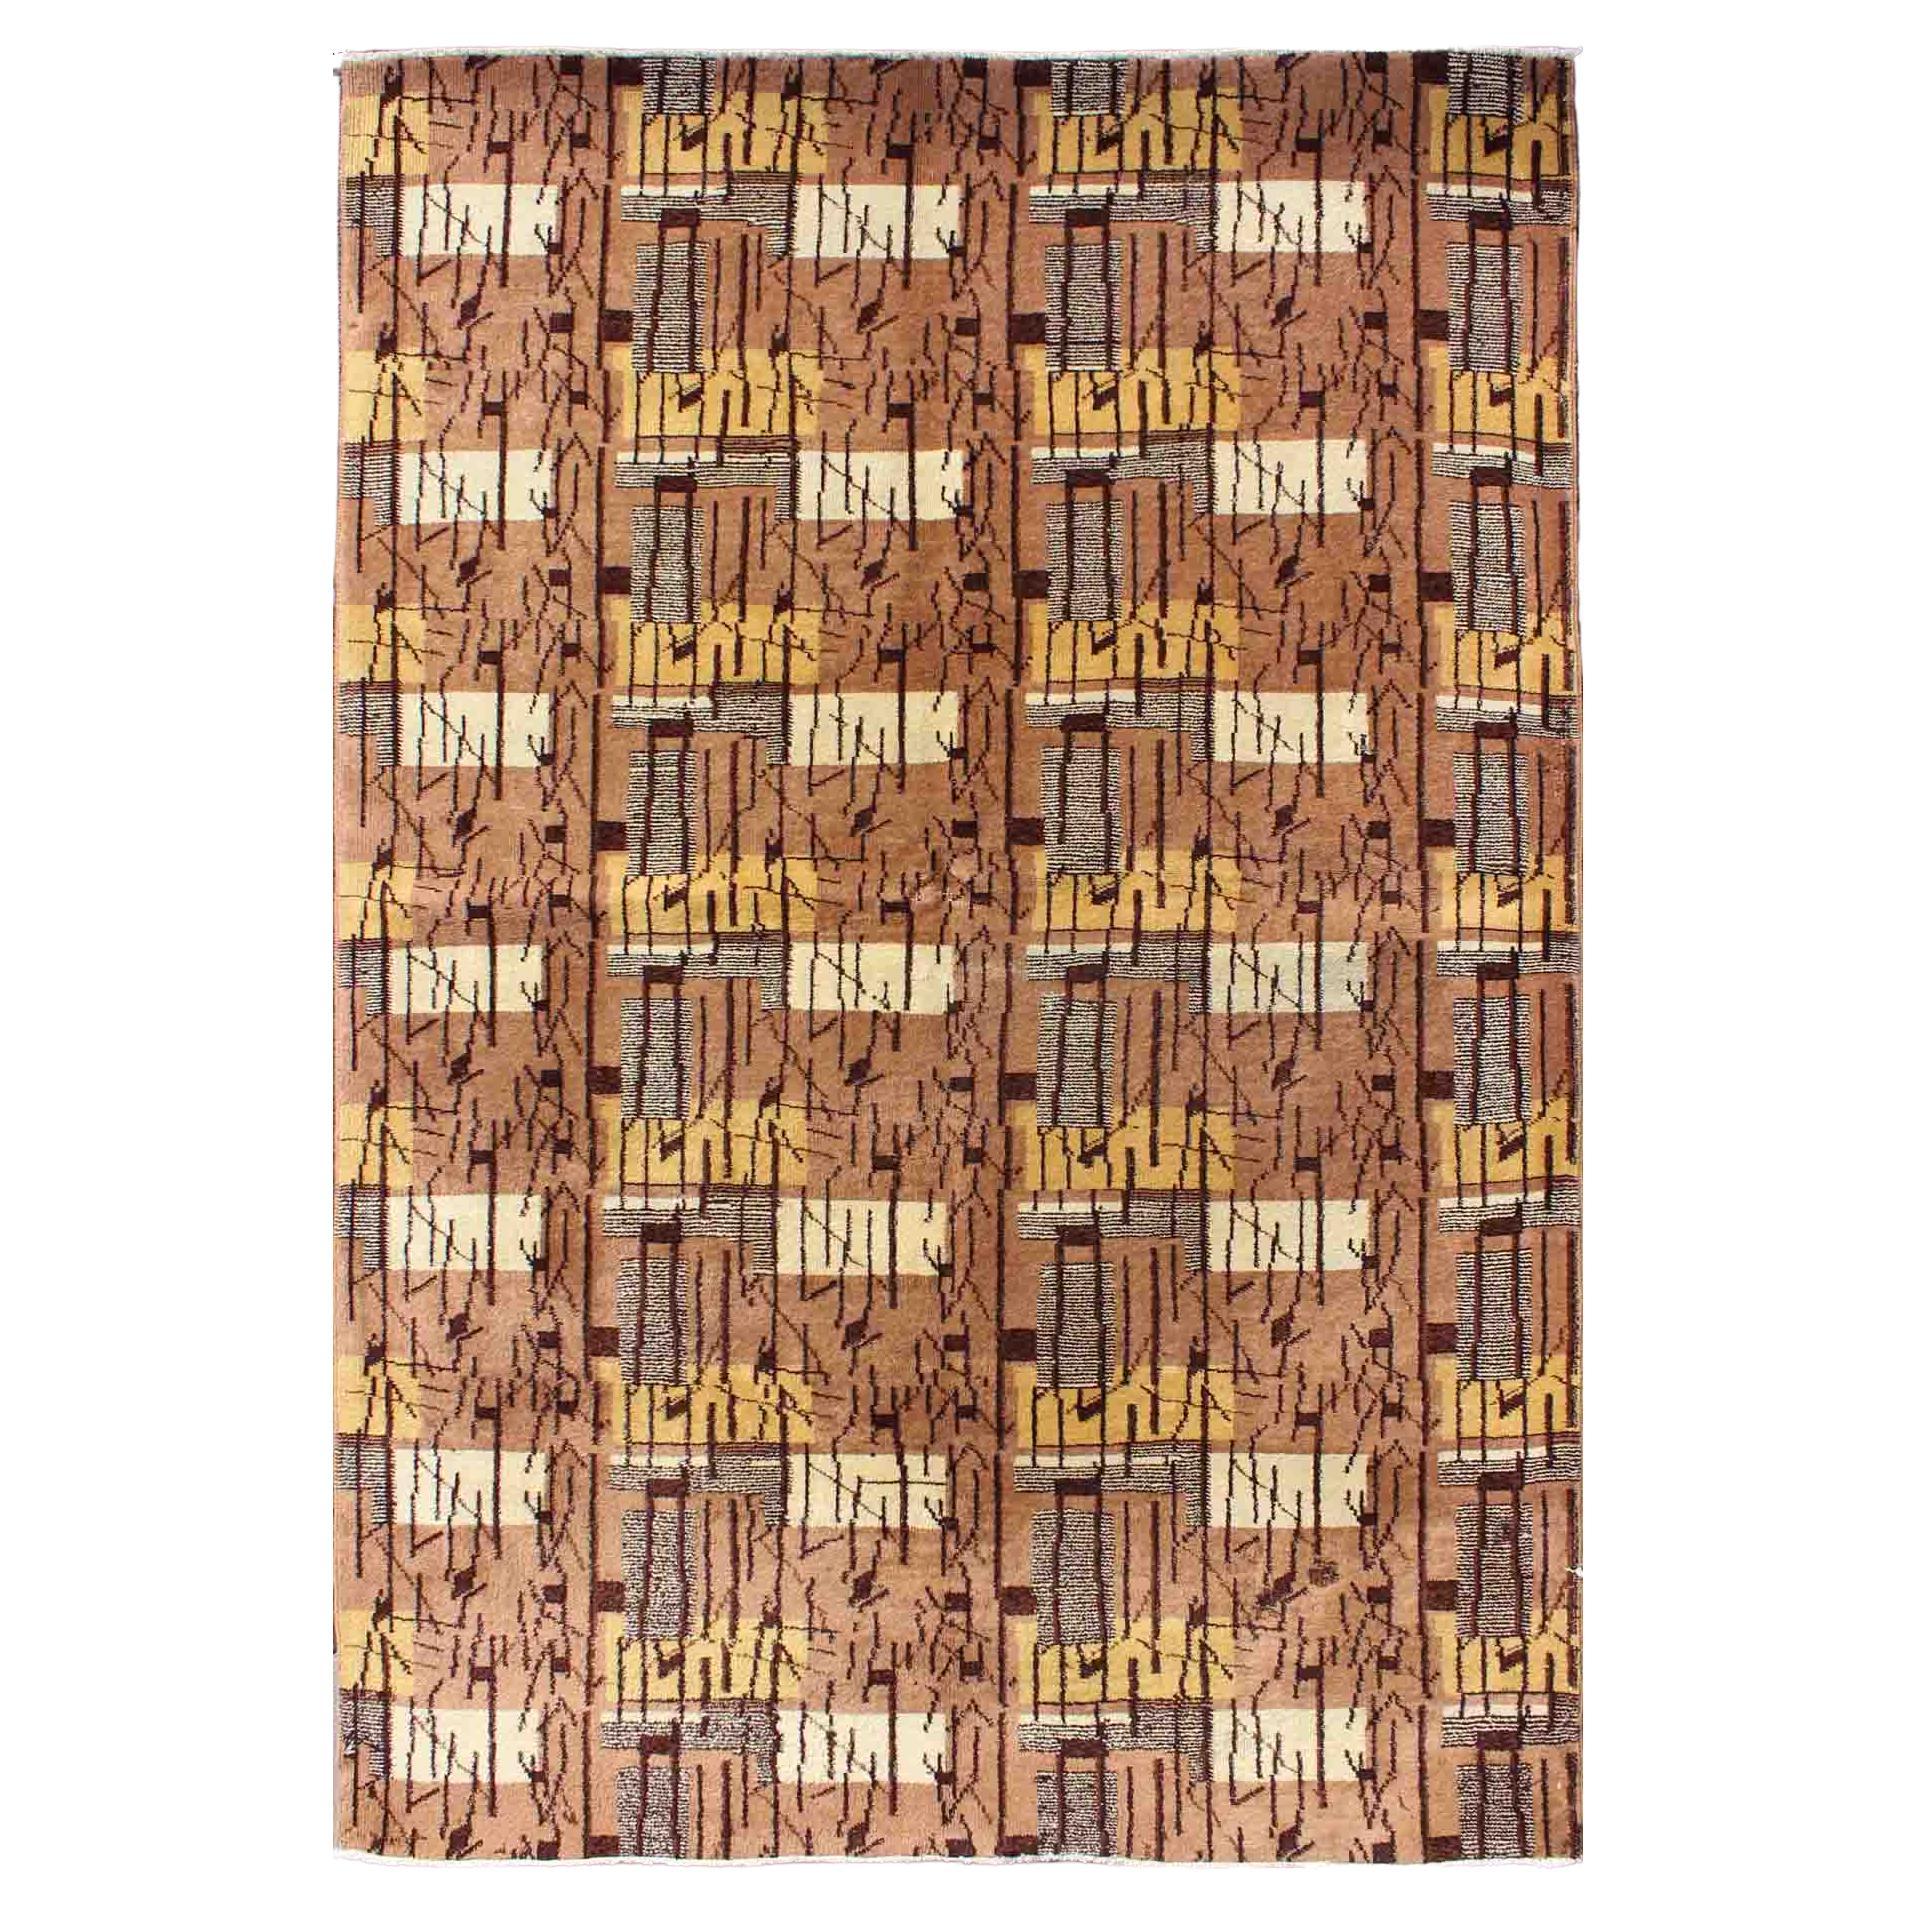 Mid-Century Modern Rug with Stripes and Blocks Design in Brown, Gray and Yellow